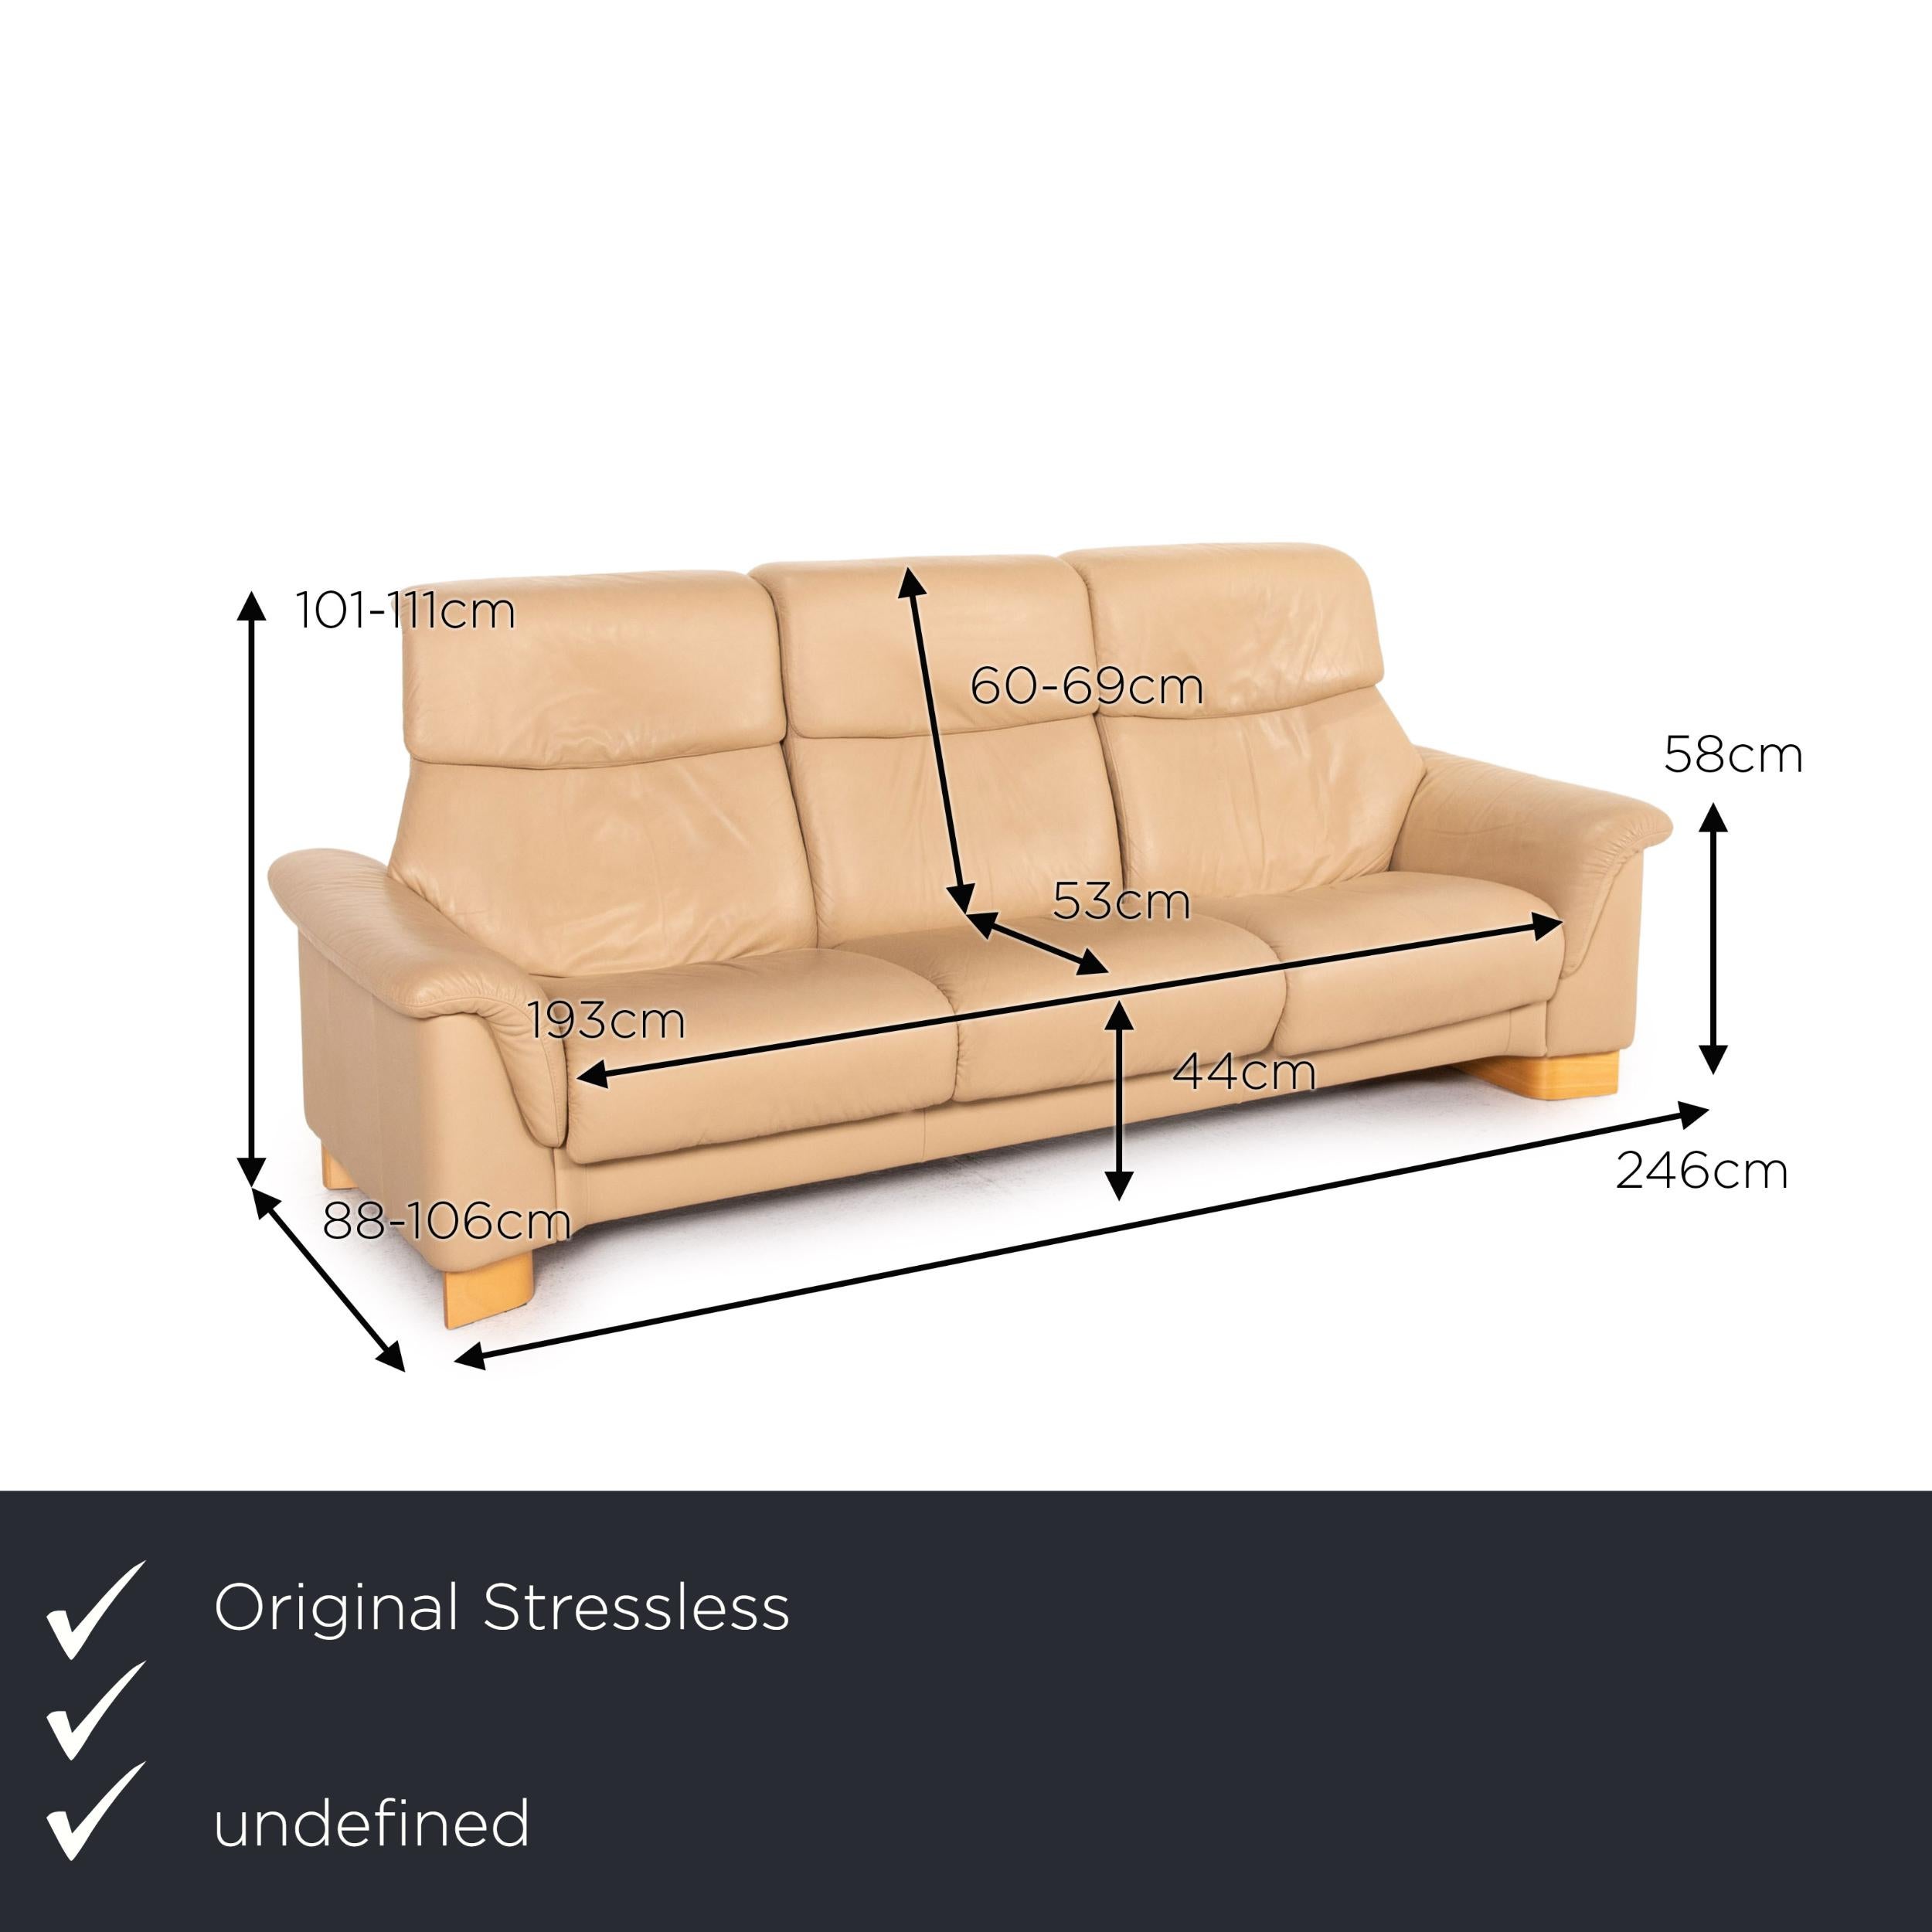 We present to you a Stressless paradise leather sofa set beige 1x three-seater 1x stool.

Product measurements in centimeters:

Depth 88
Width 246
Height 101
Seat height 44
Rest height 58
Seat depth 53
Seat width 193
Back height